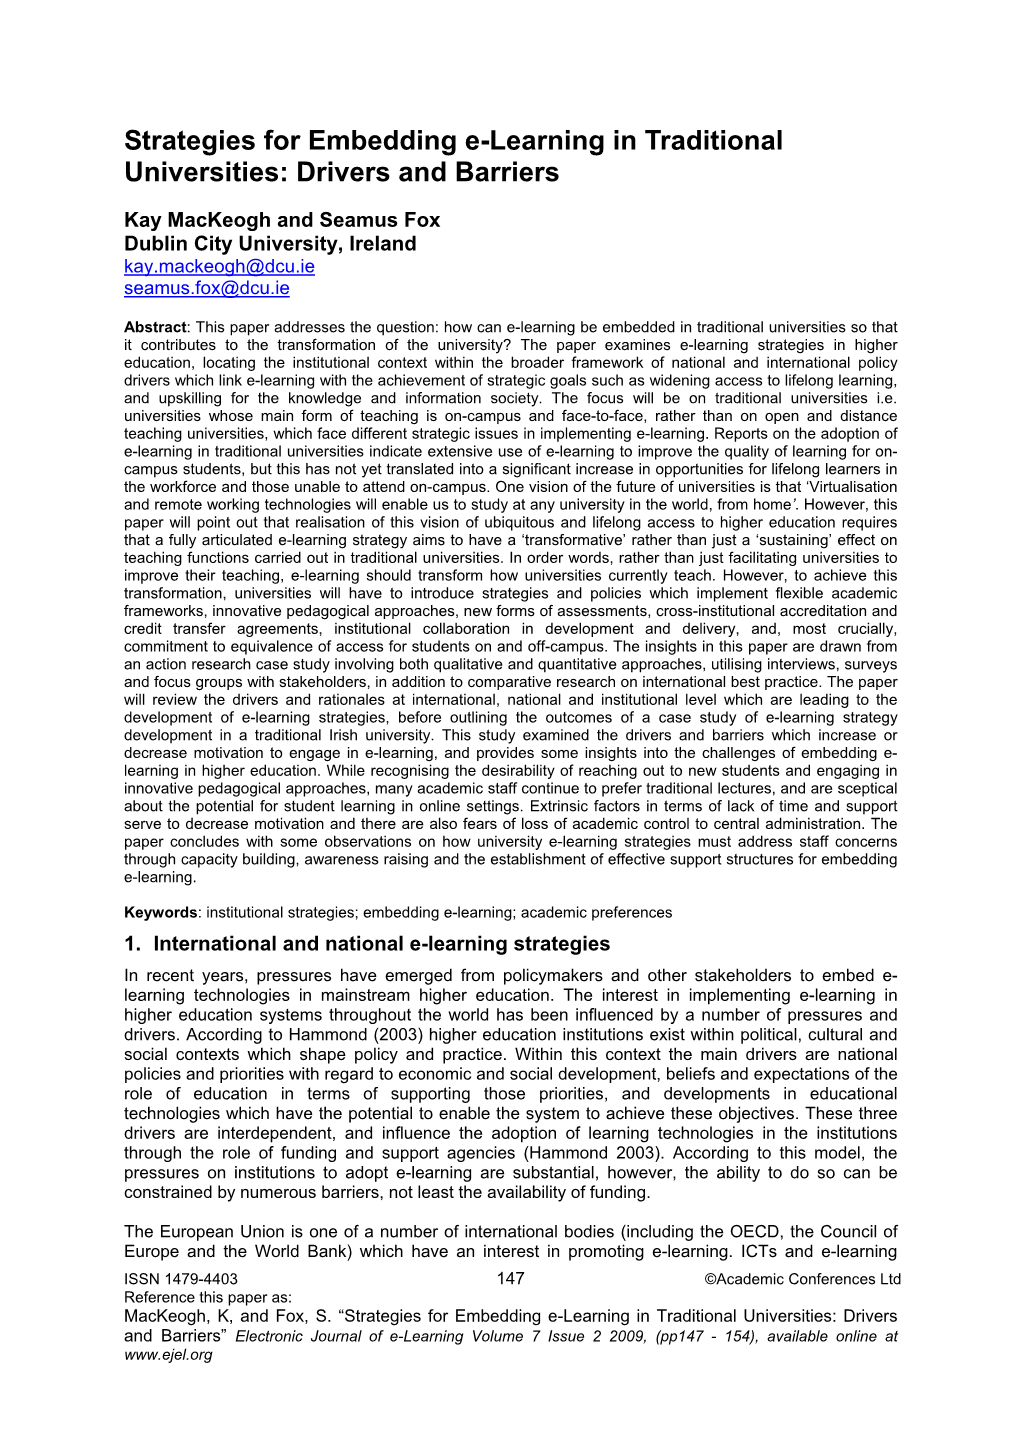 Strategies for Embedding E-Learning in Traditional Universities: Drivers and Barriers